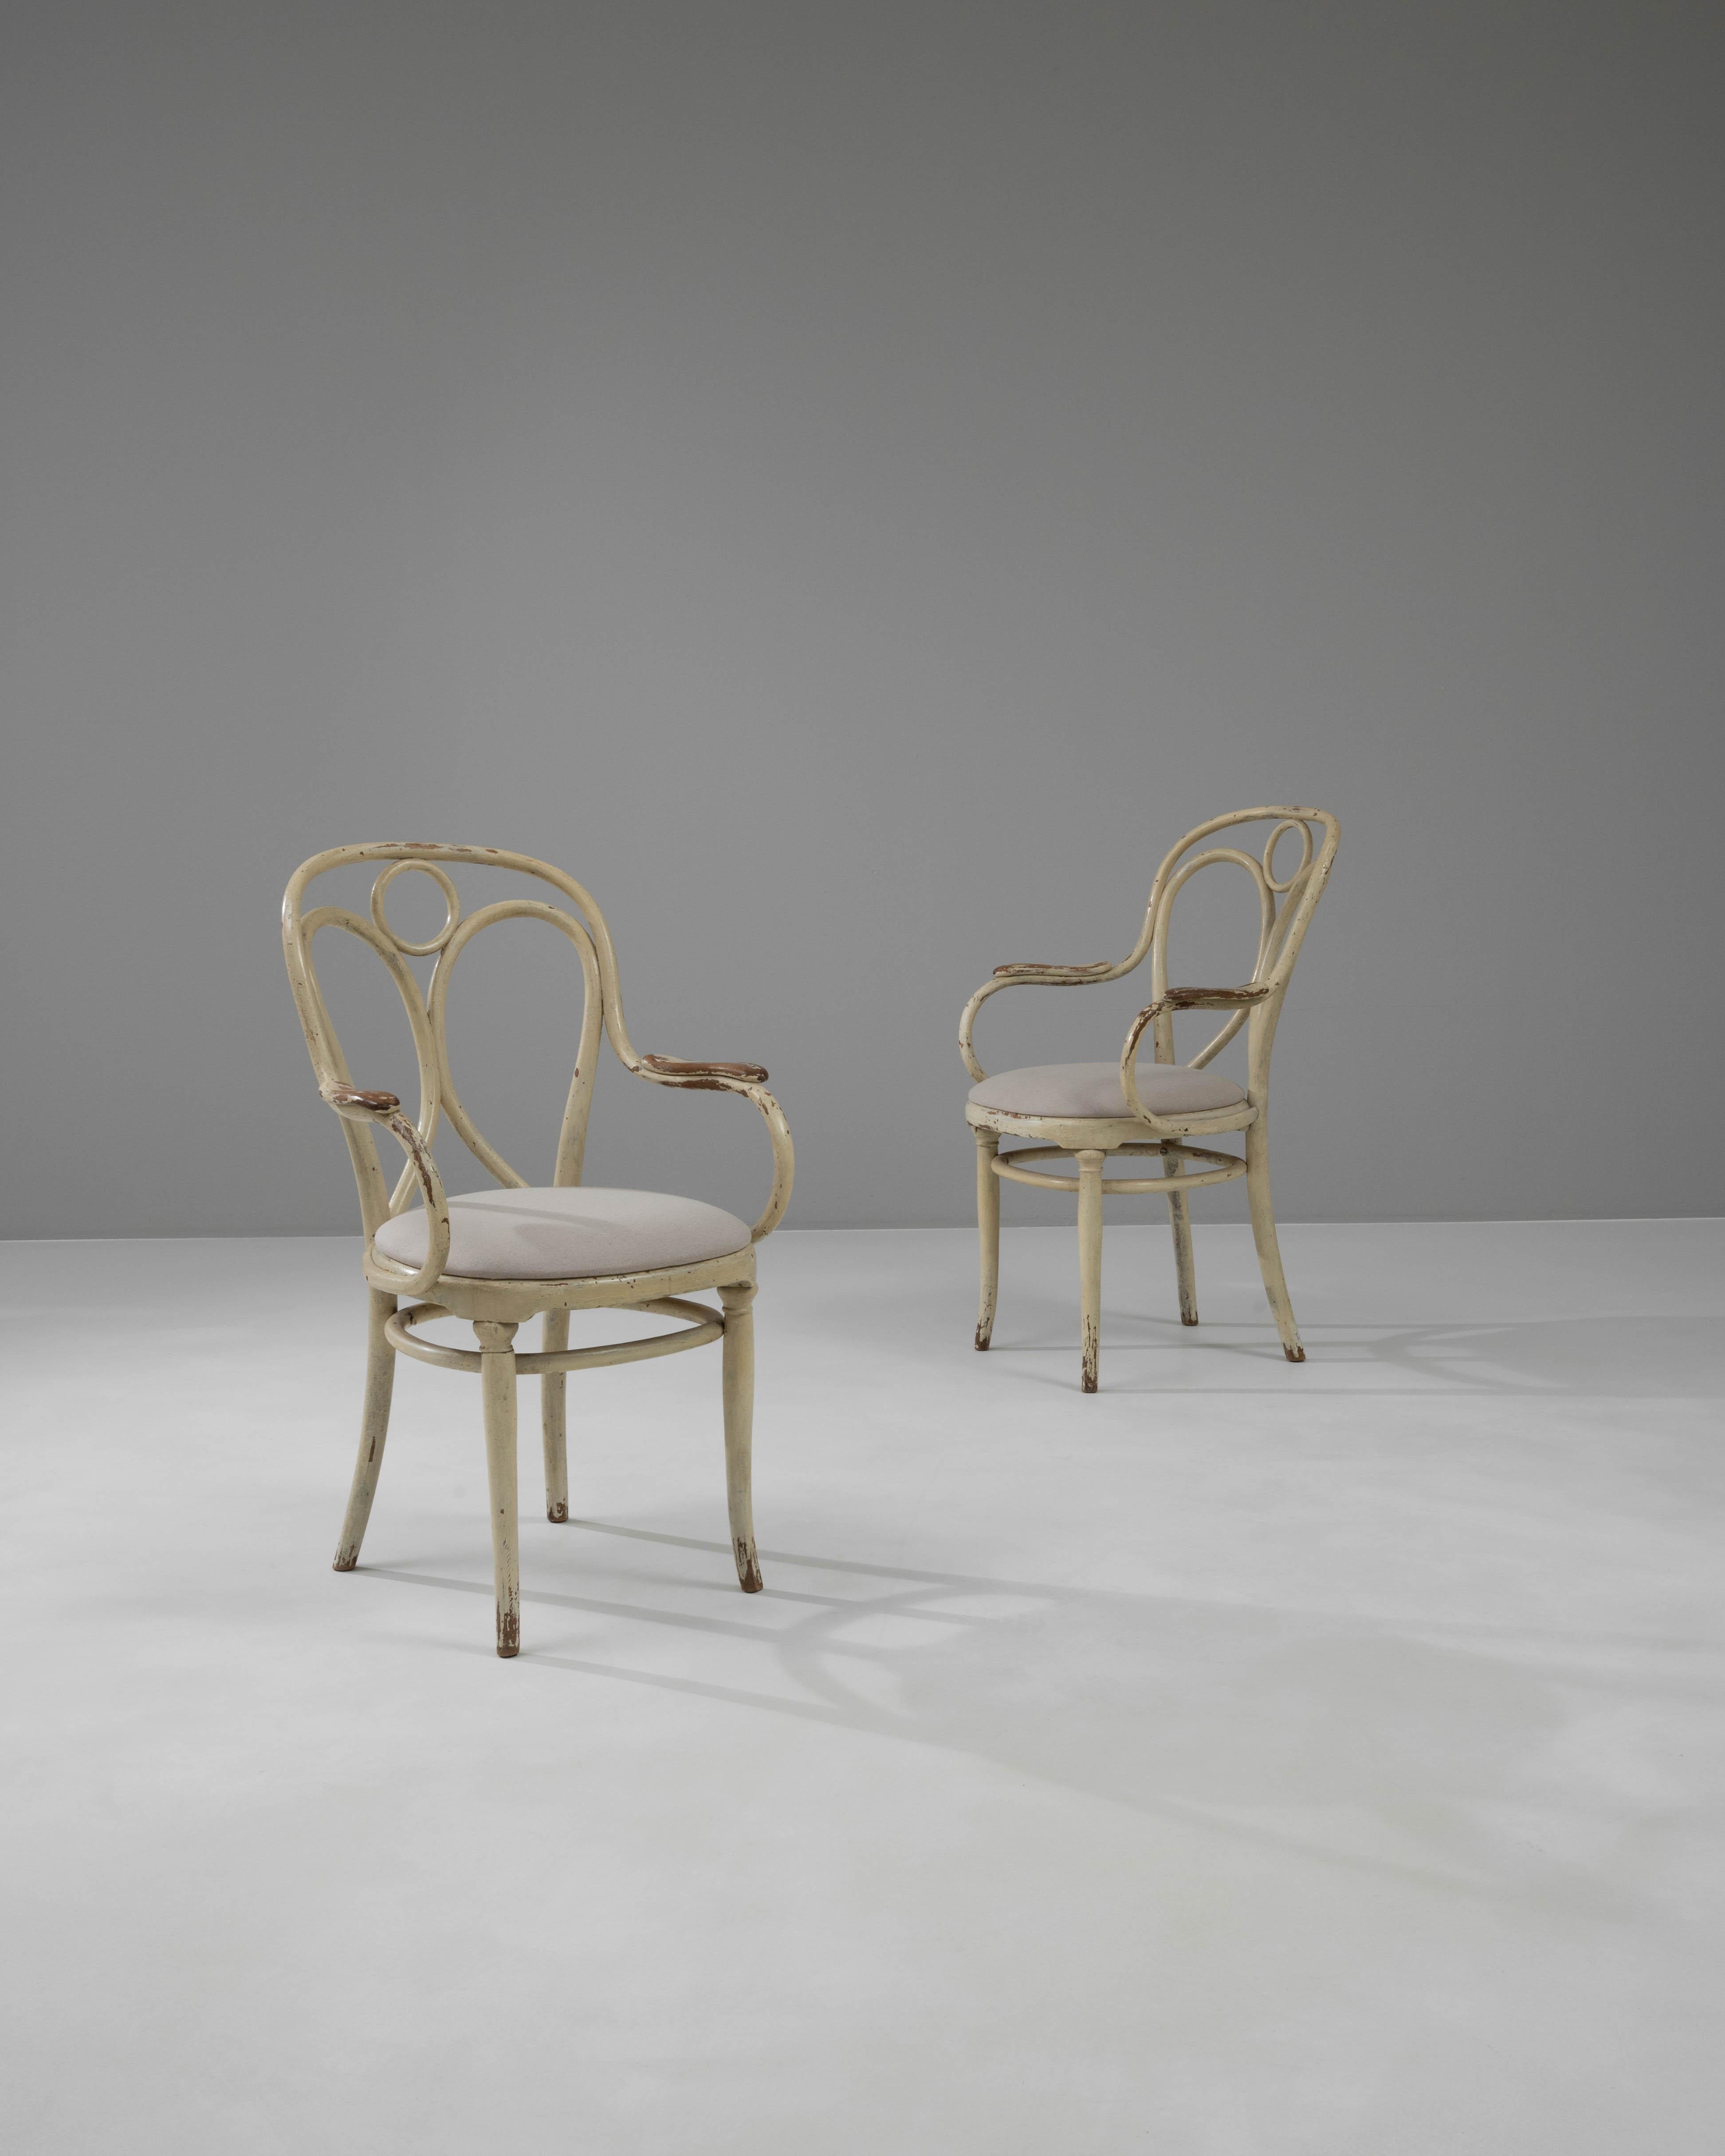 Add a piece of historical elegance to your home with these 1900s Austrian Wooden Chairs, a stunning pair that blends classic beauty with intricate design. These chairs are a testament to the refined craftsmanship of the early 20th century, featuring